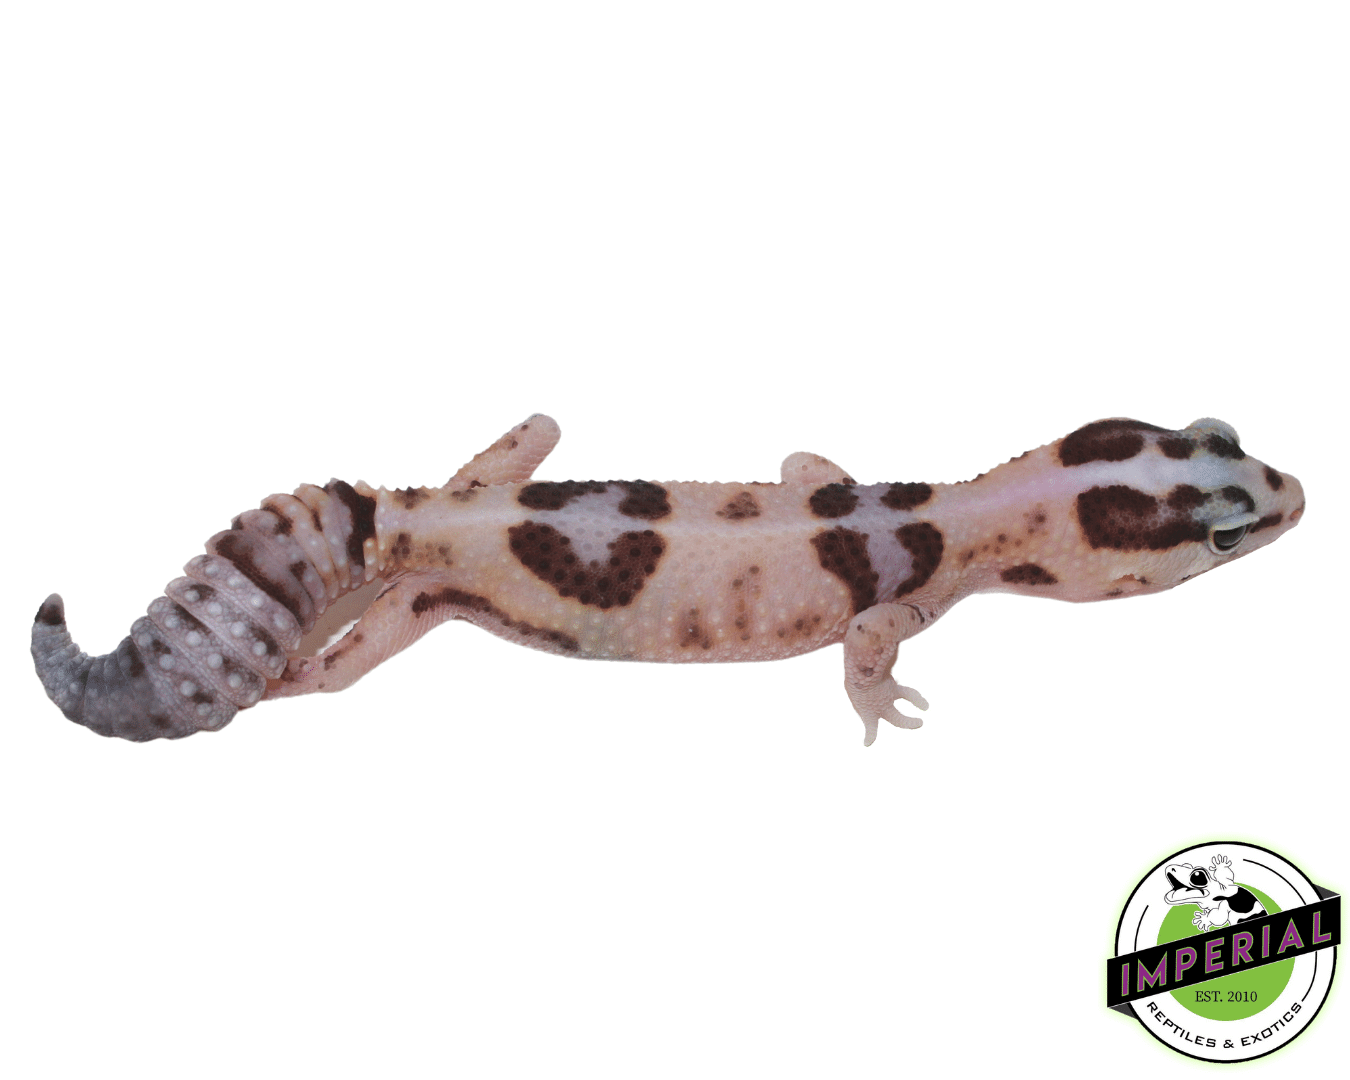 Striped Whiteout ph Amel Oreo African Fat Tail gecko for sale, buy reptiles online